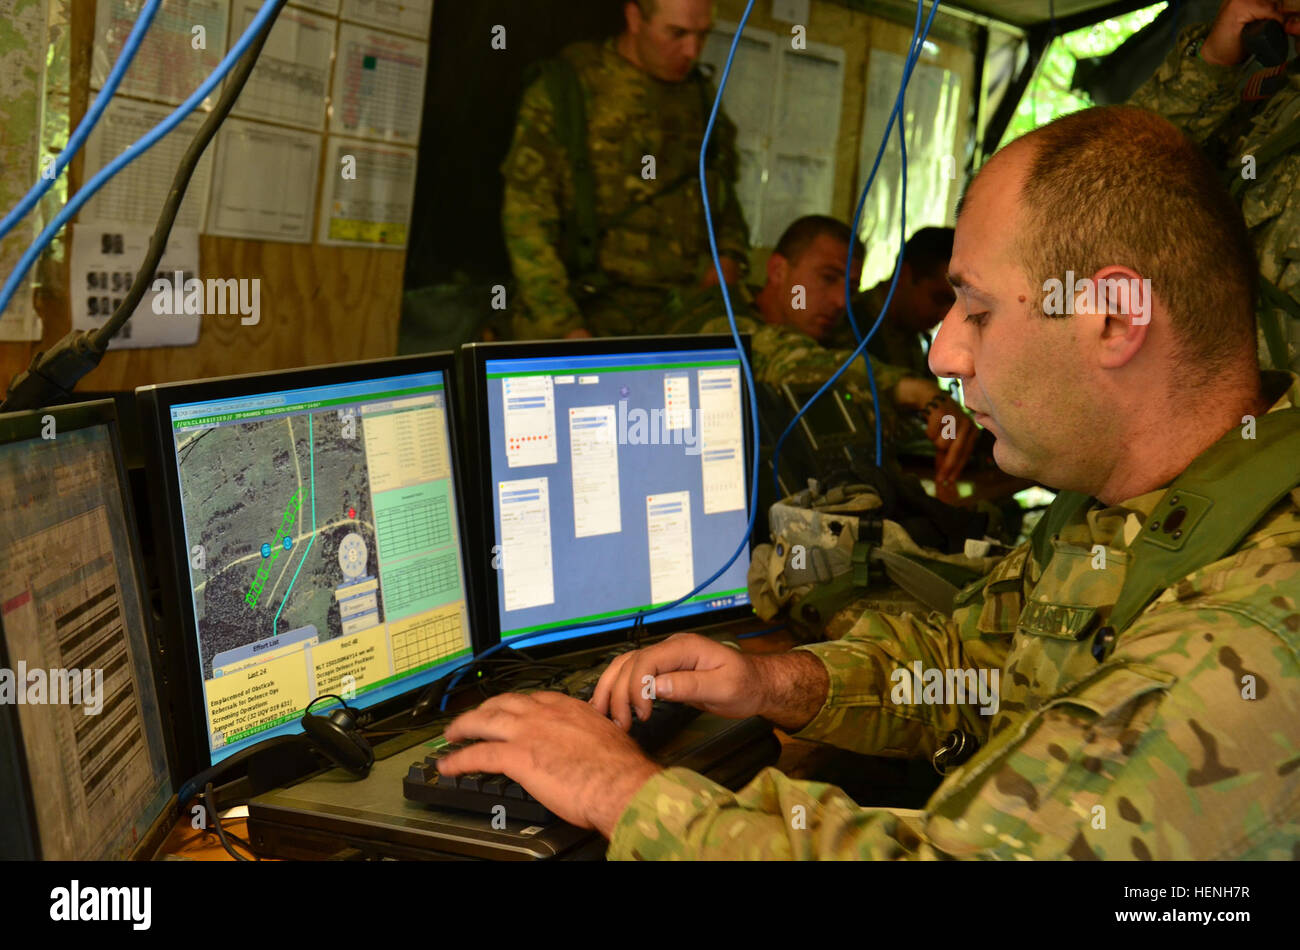 A Georgian soldier updates a digital map during exercise Combined Resolve II at the Joint Multinational Readiness Center in Hohenfels, Germany, May 25, 2014.  Combined Resolve II is a multinational decisive action training environment exercise occurring at the Joint Multinational Training Command's Hohenfels and Grafenwoehr Training Areas that involves more than 4,000 participants from 15 partner nations.  The intent of the exercise is to train and prepare a U.S. led multinational brigade to interoperate with multiple partner nations and execute unified land operations against a complex threat Stock Photo